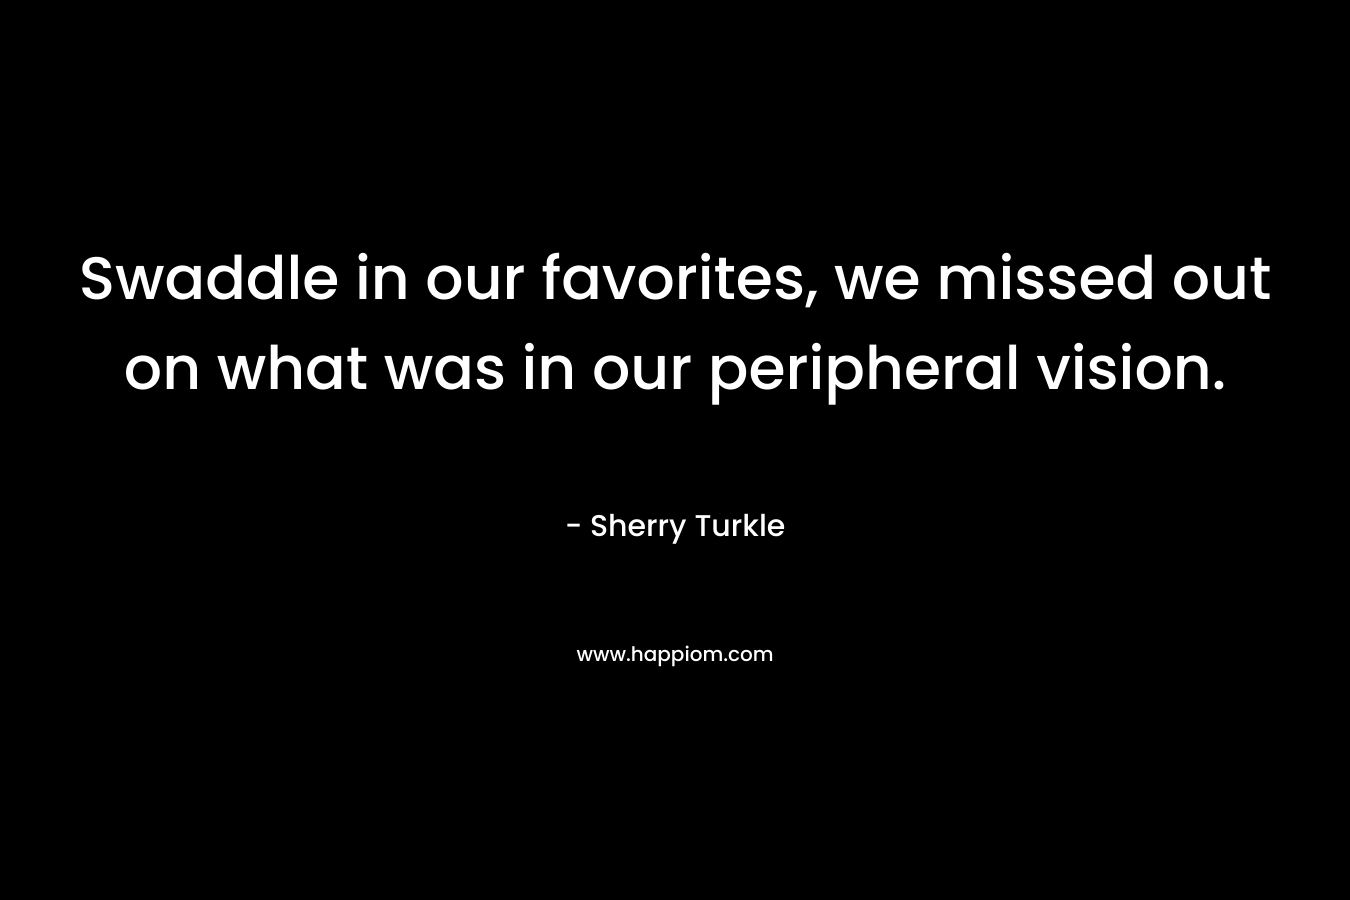 Swaddle in our favorites, we missed out on what was in our peripheral vision. – Sherry Turkle